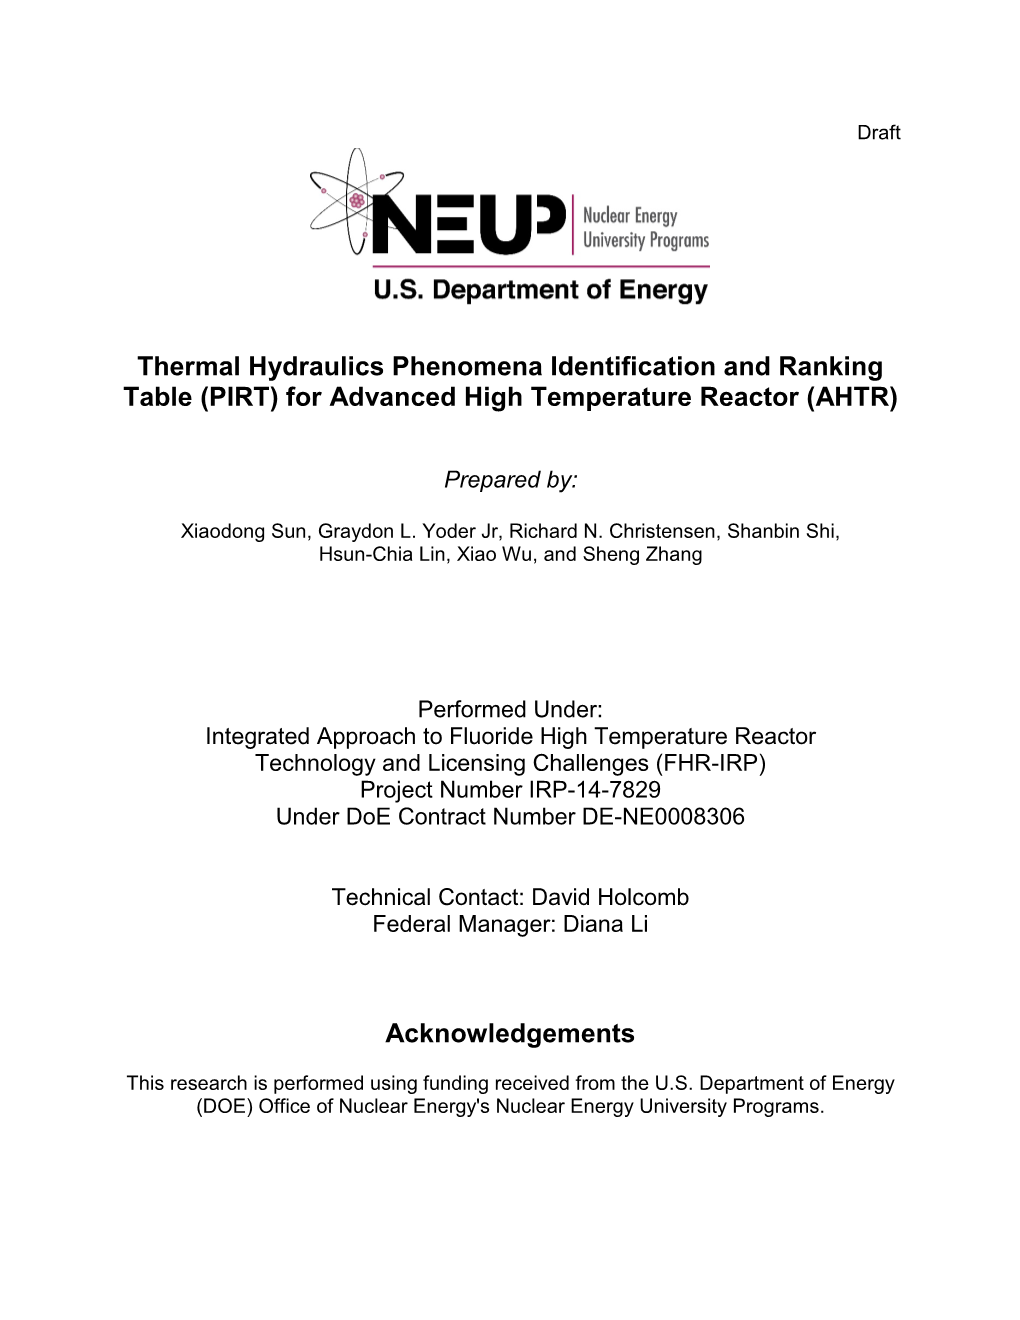 Thermal Hydraulics Phenomena Identification and Ranking Table (PIRT) for Advanced High Temperature Reactor (AHTR)